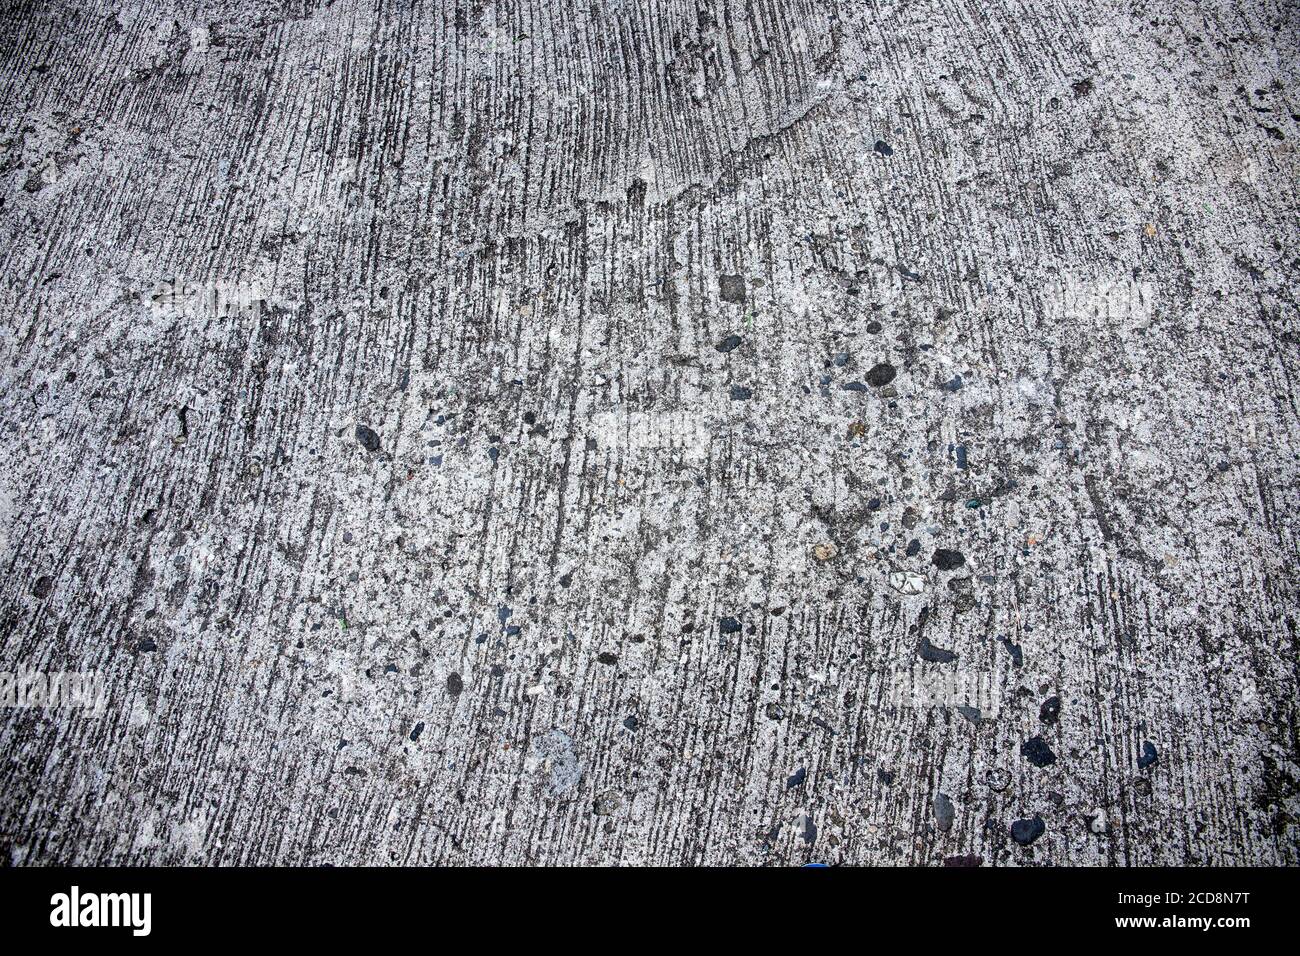 Weathered scratched concrete surface photo texture. Grunge concrete road perspective view. Rough concrete or asphalt surface with gravel. Weathered ro Stock Photo